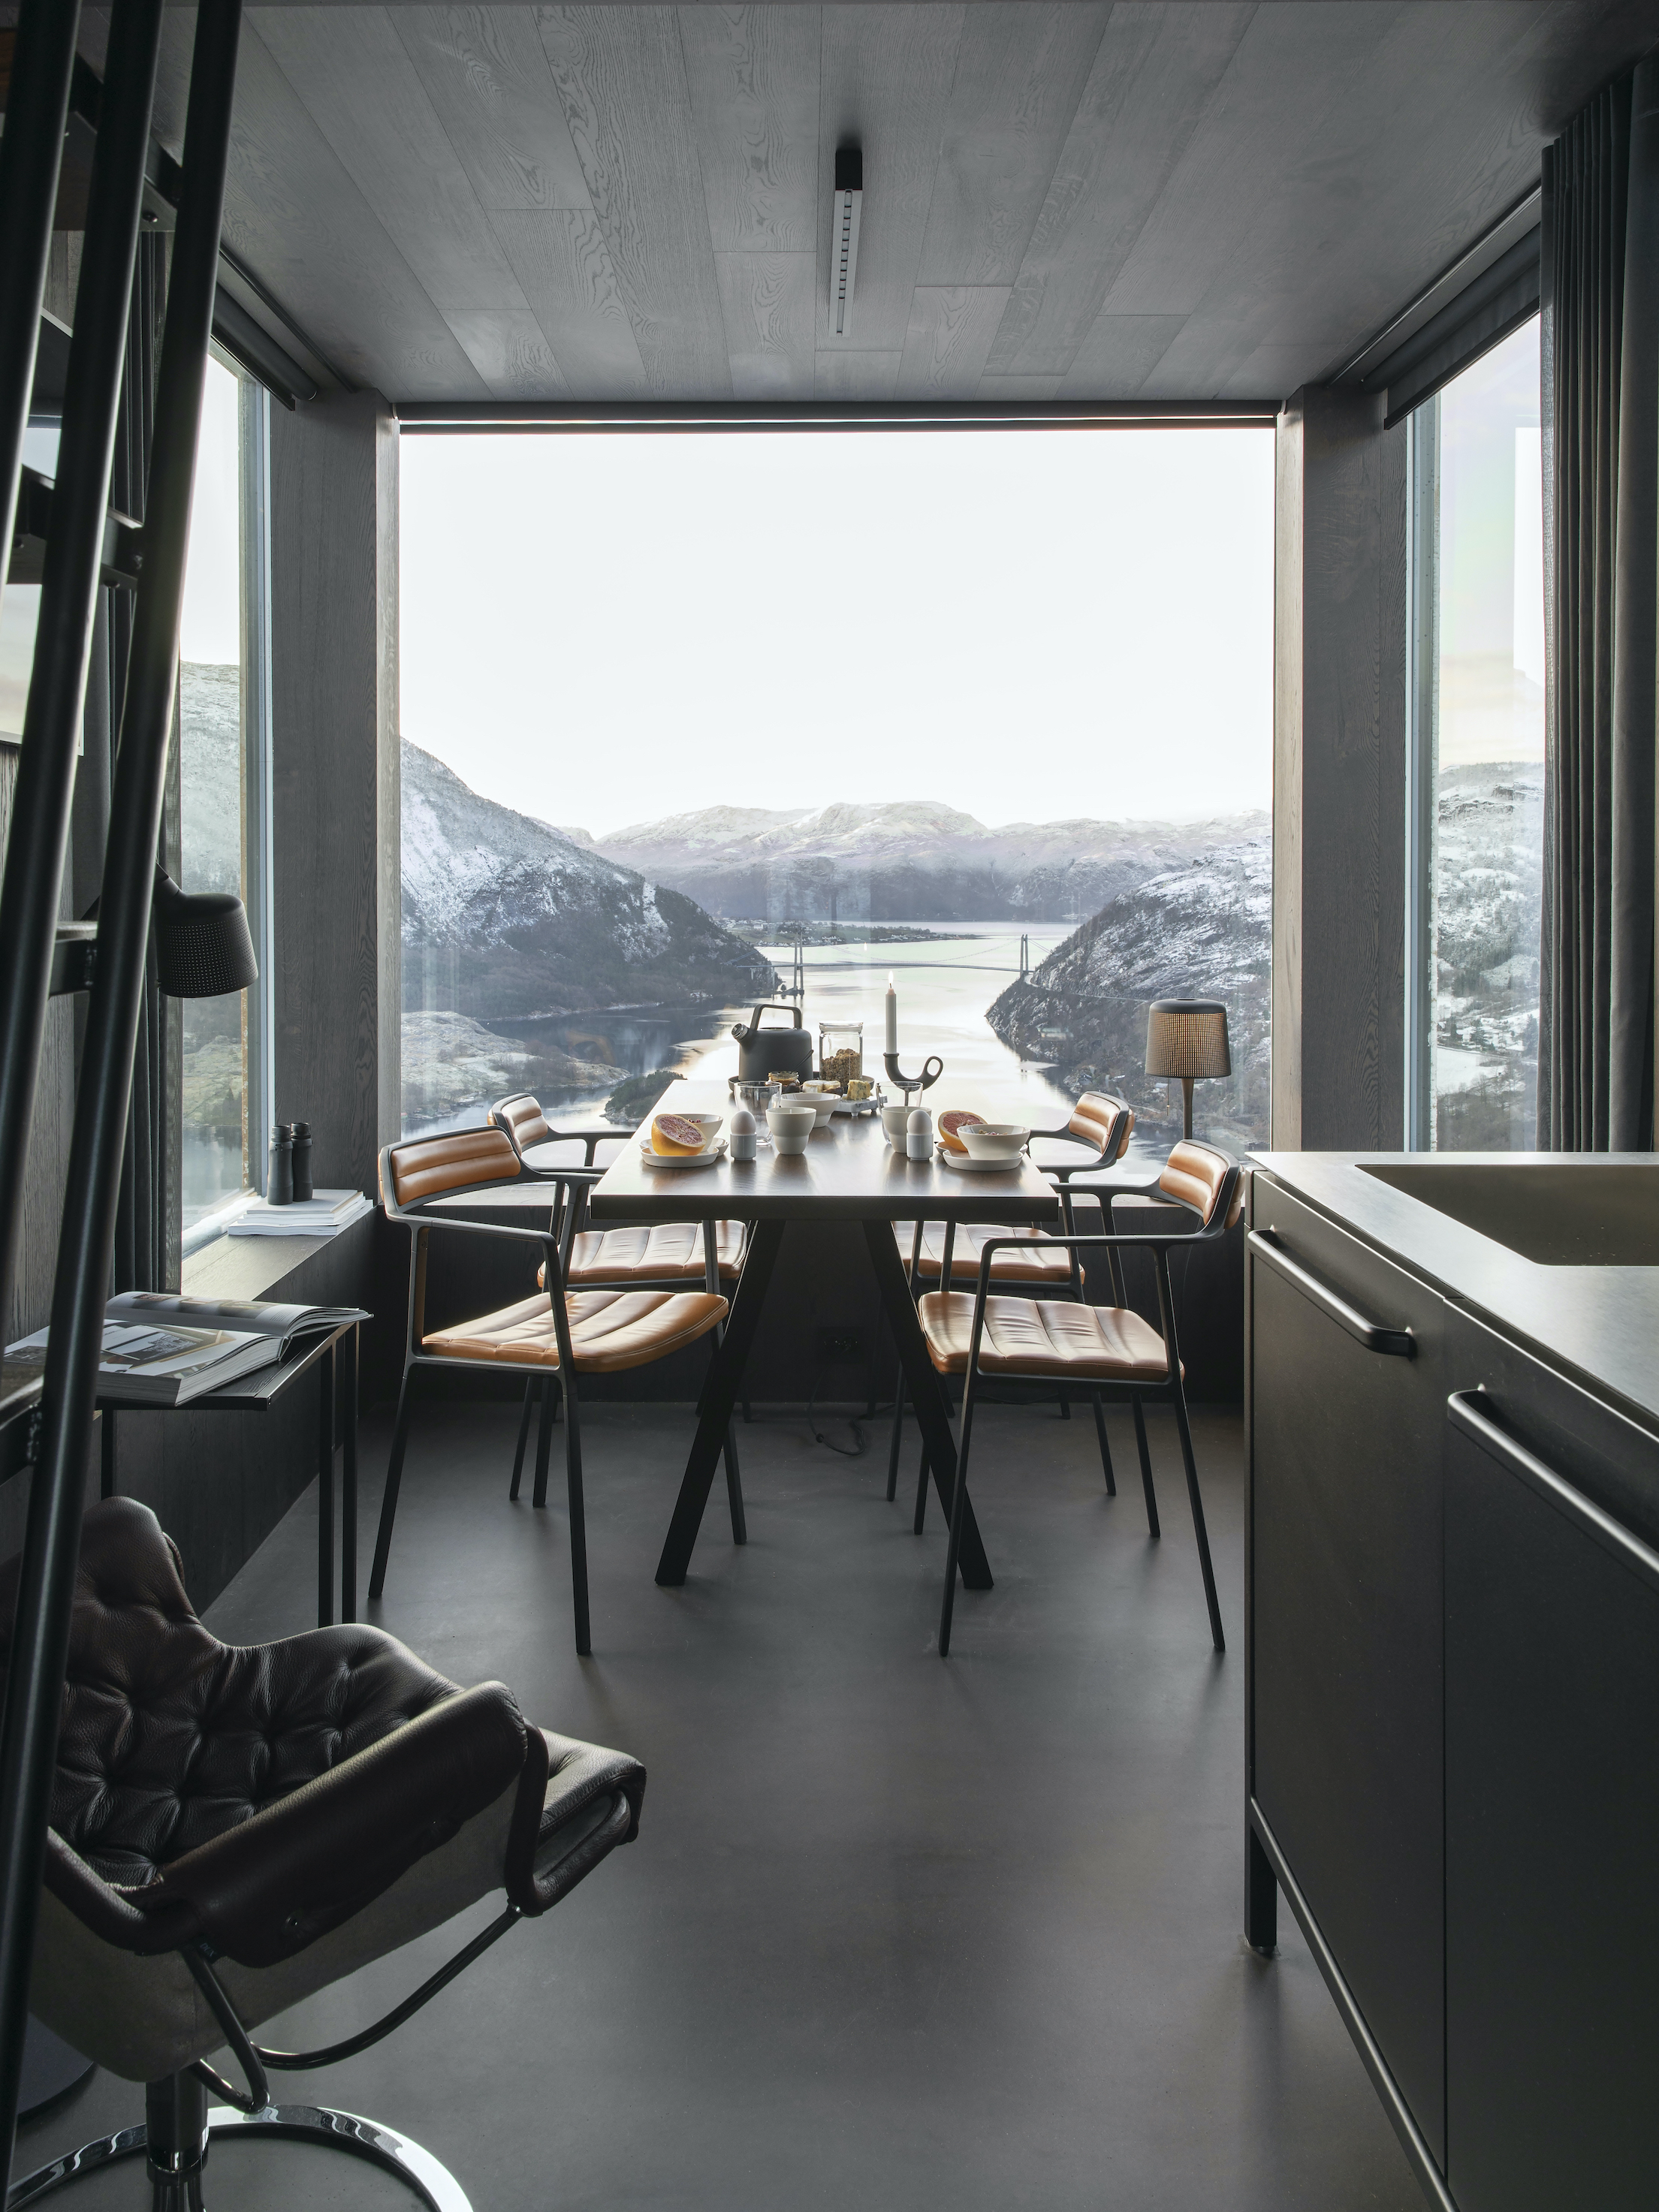 the cabins deliver front row views of the fjord. “the cubes are intentio 10